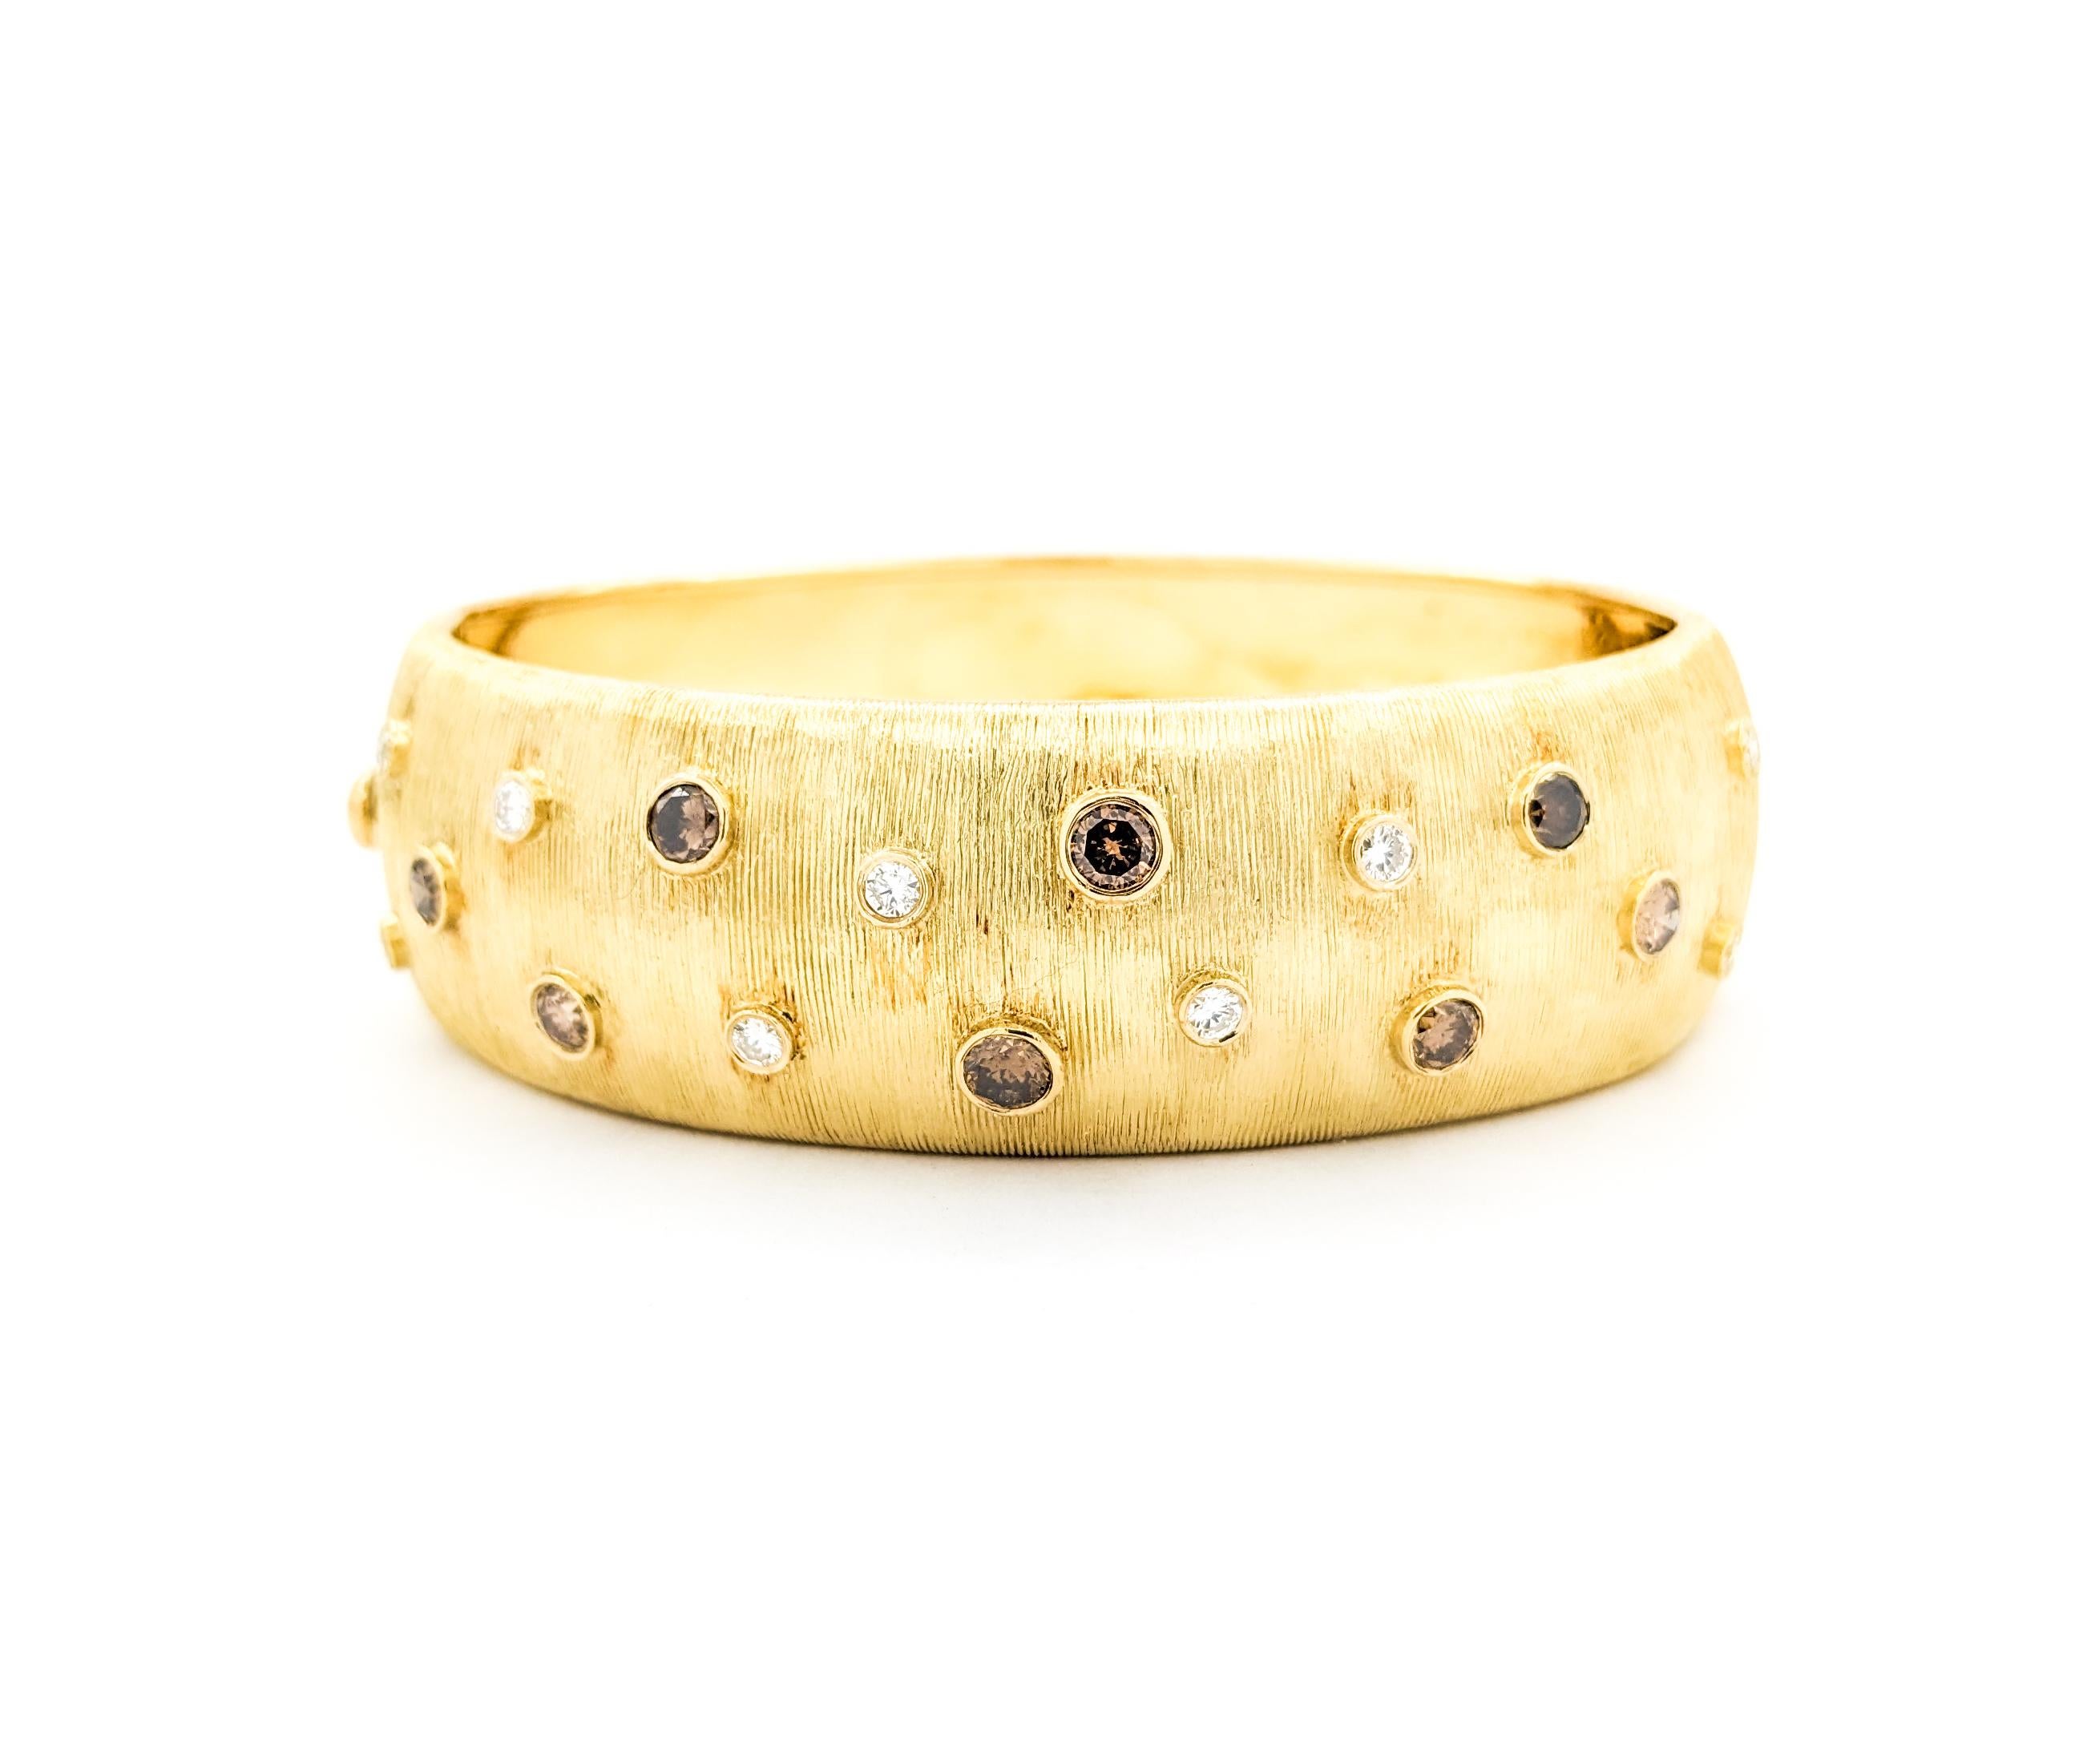 .80ctw Brown Diamond & .36ctw White Diamond Hinged Bangle Bracelet In Yellow Gold

This luxurious Hinged Bangle Bracelet, exquisitely crafted in 18kt yellow gold, showcases an elegant design enhanced by .36ctw of SI clarity, near colorless round